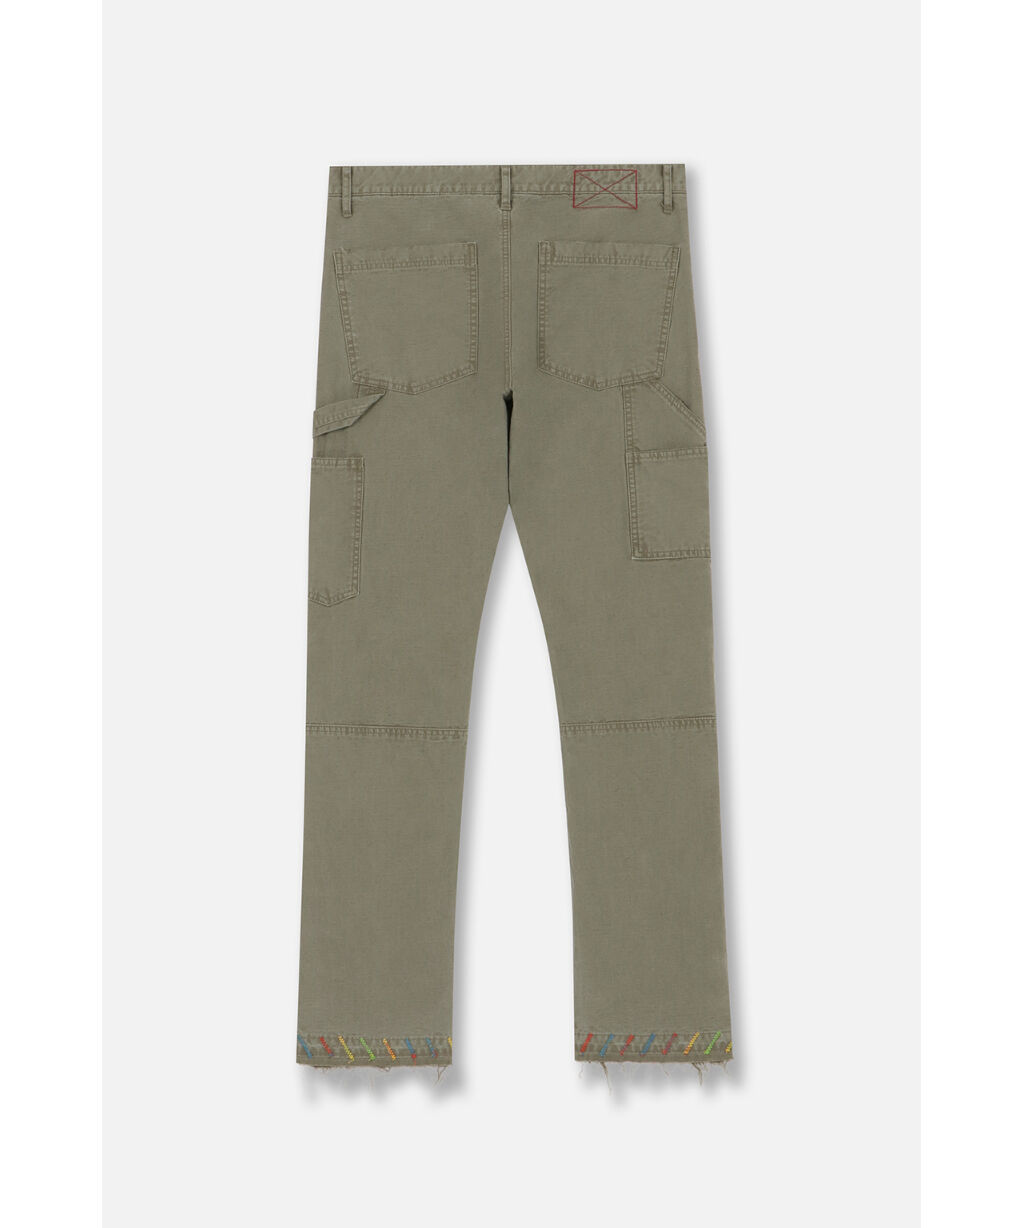 MLVINCE / double knee pants olive